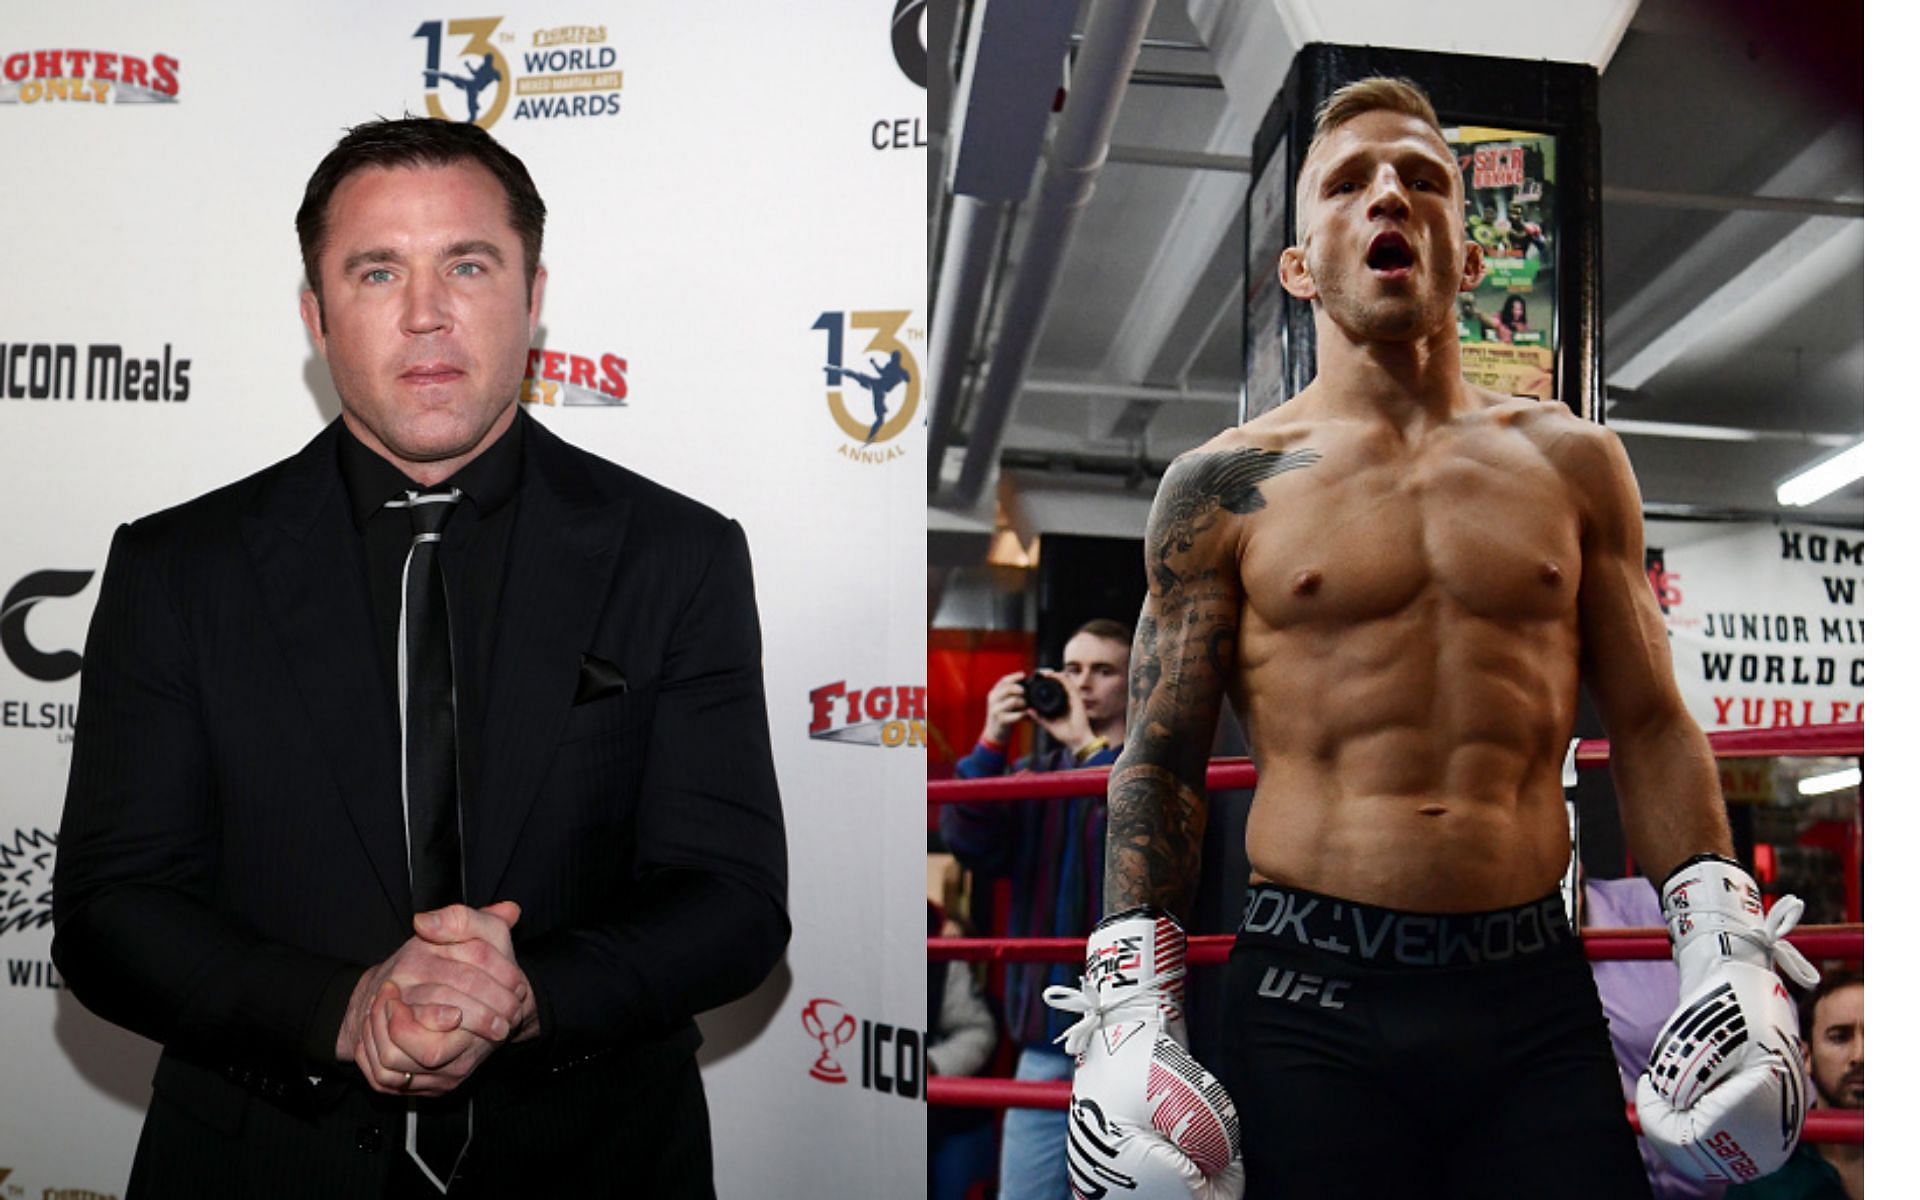 Chael Sonnen (left) and T.J. Dillashaw (right)